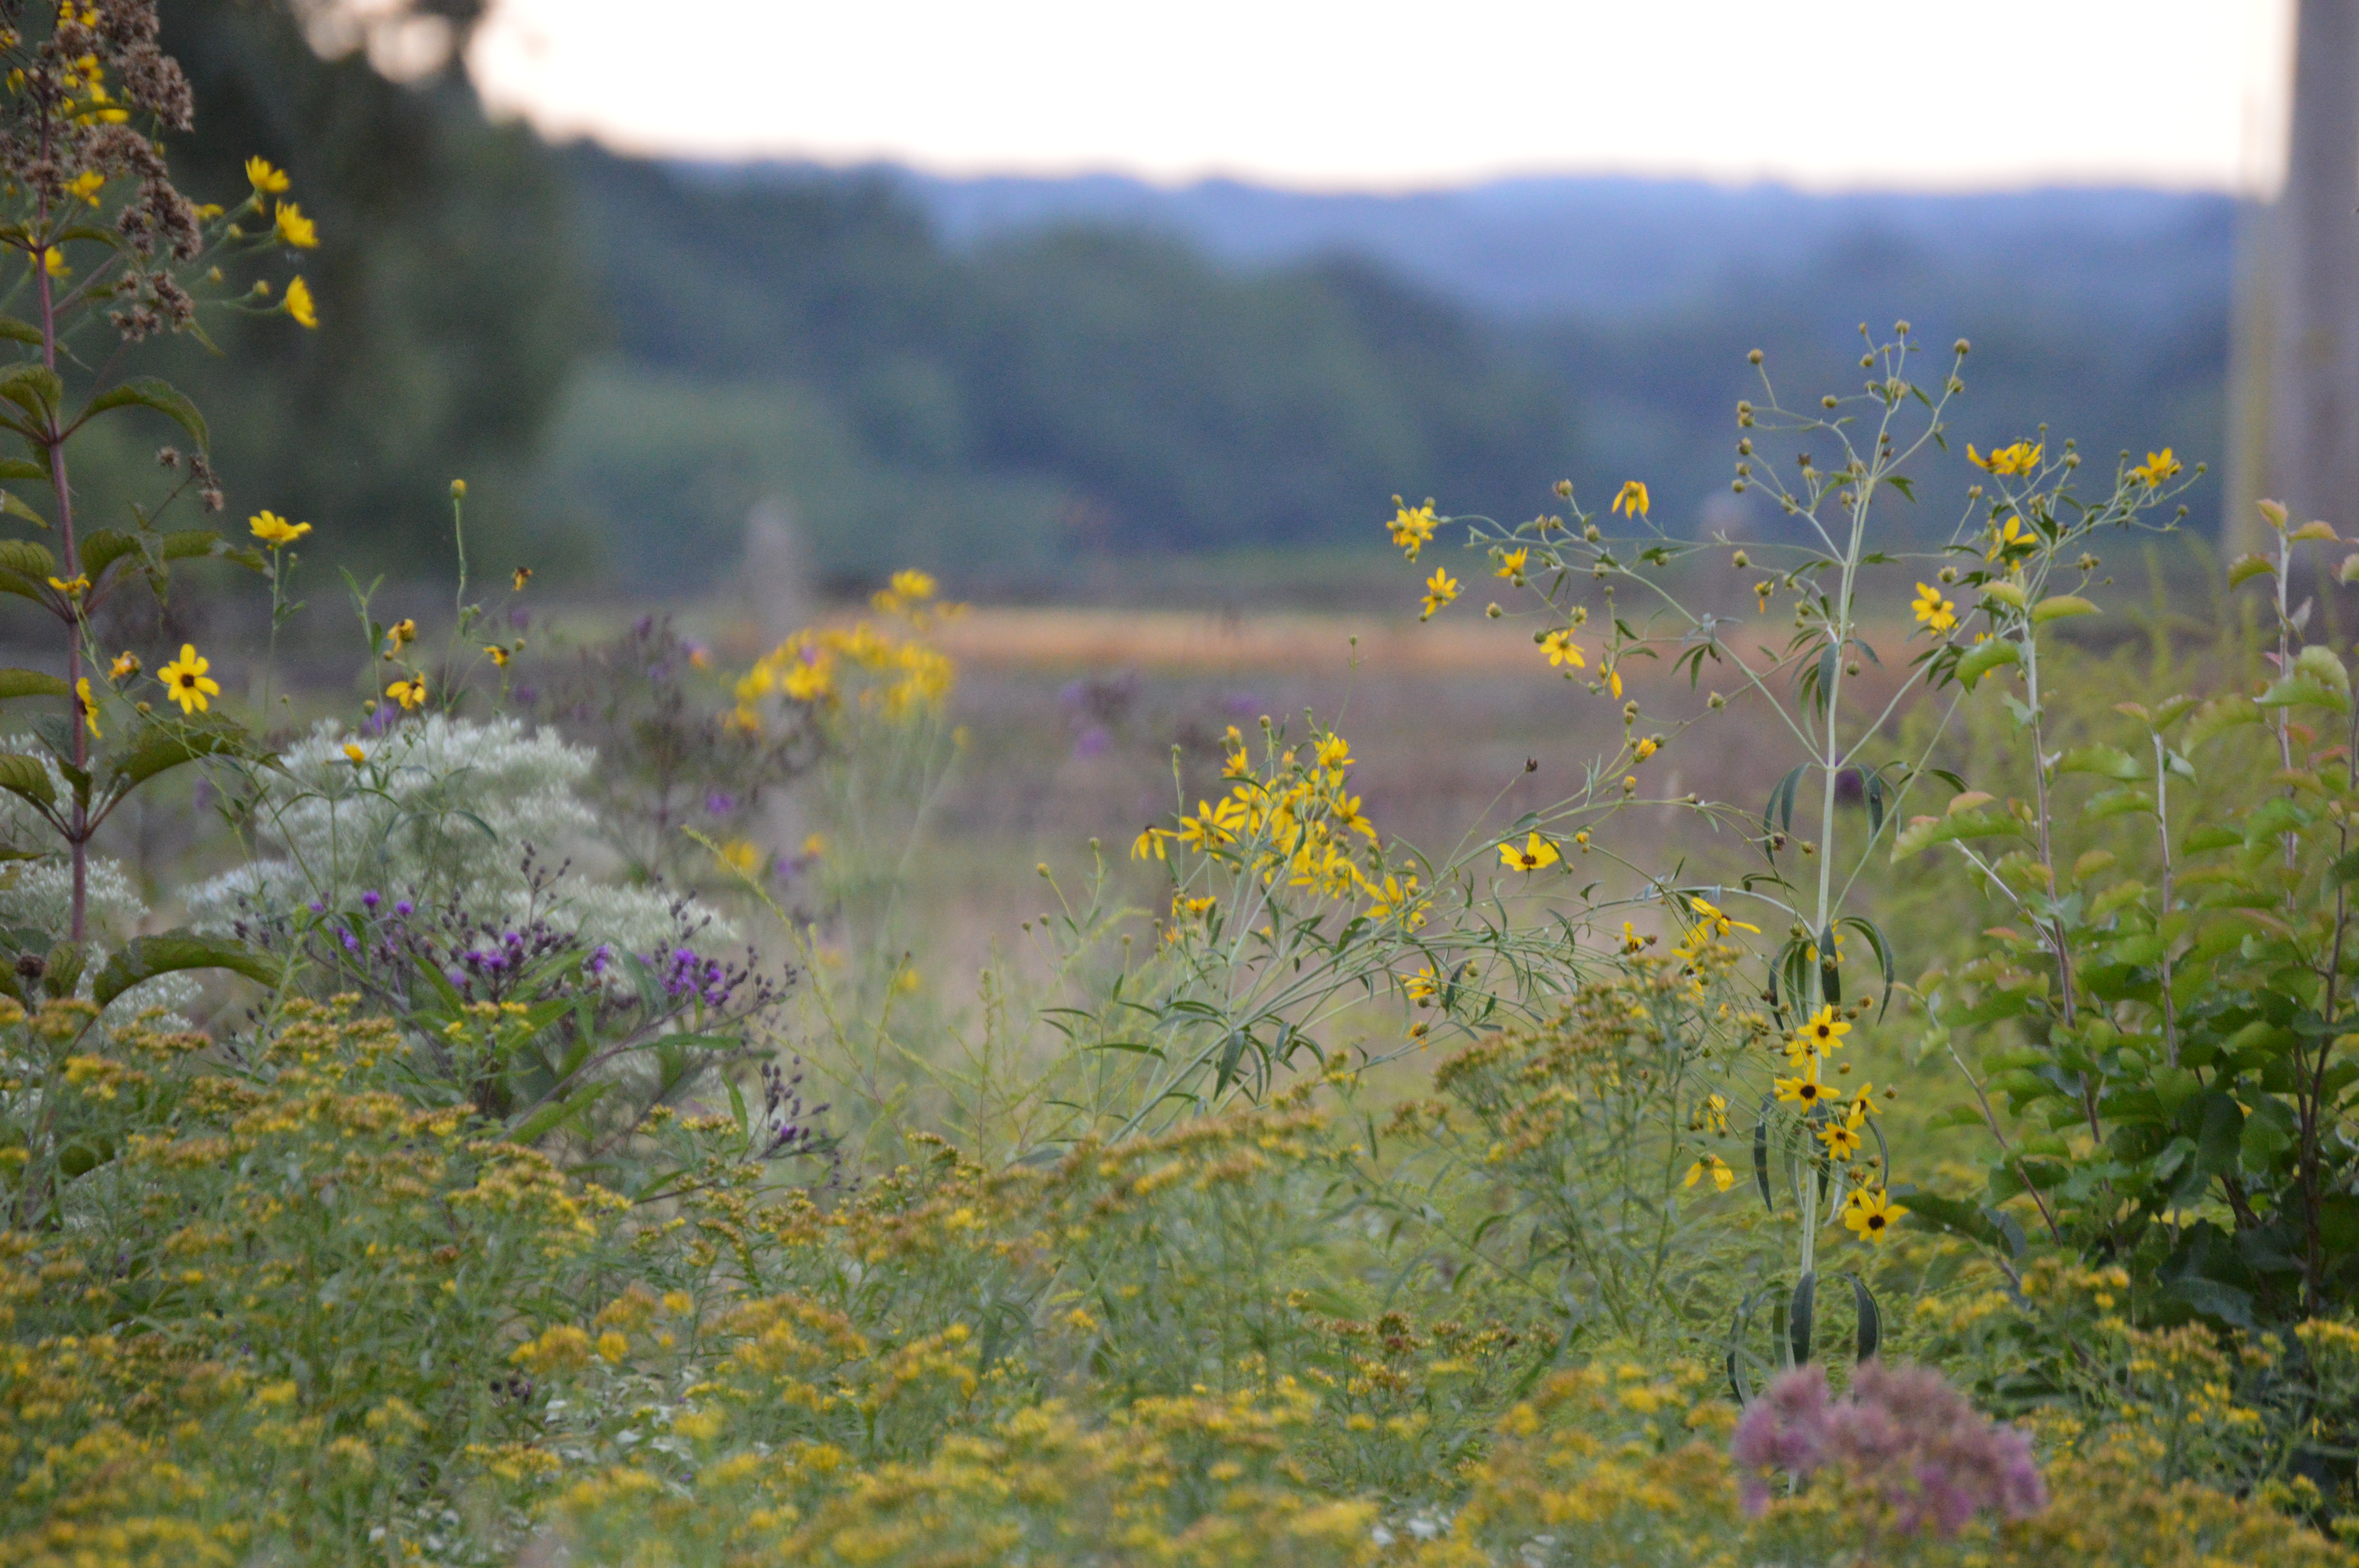 The Willistown Conservation Trust's wildflower meadow in September. Photo by Blake Goll/Staff.